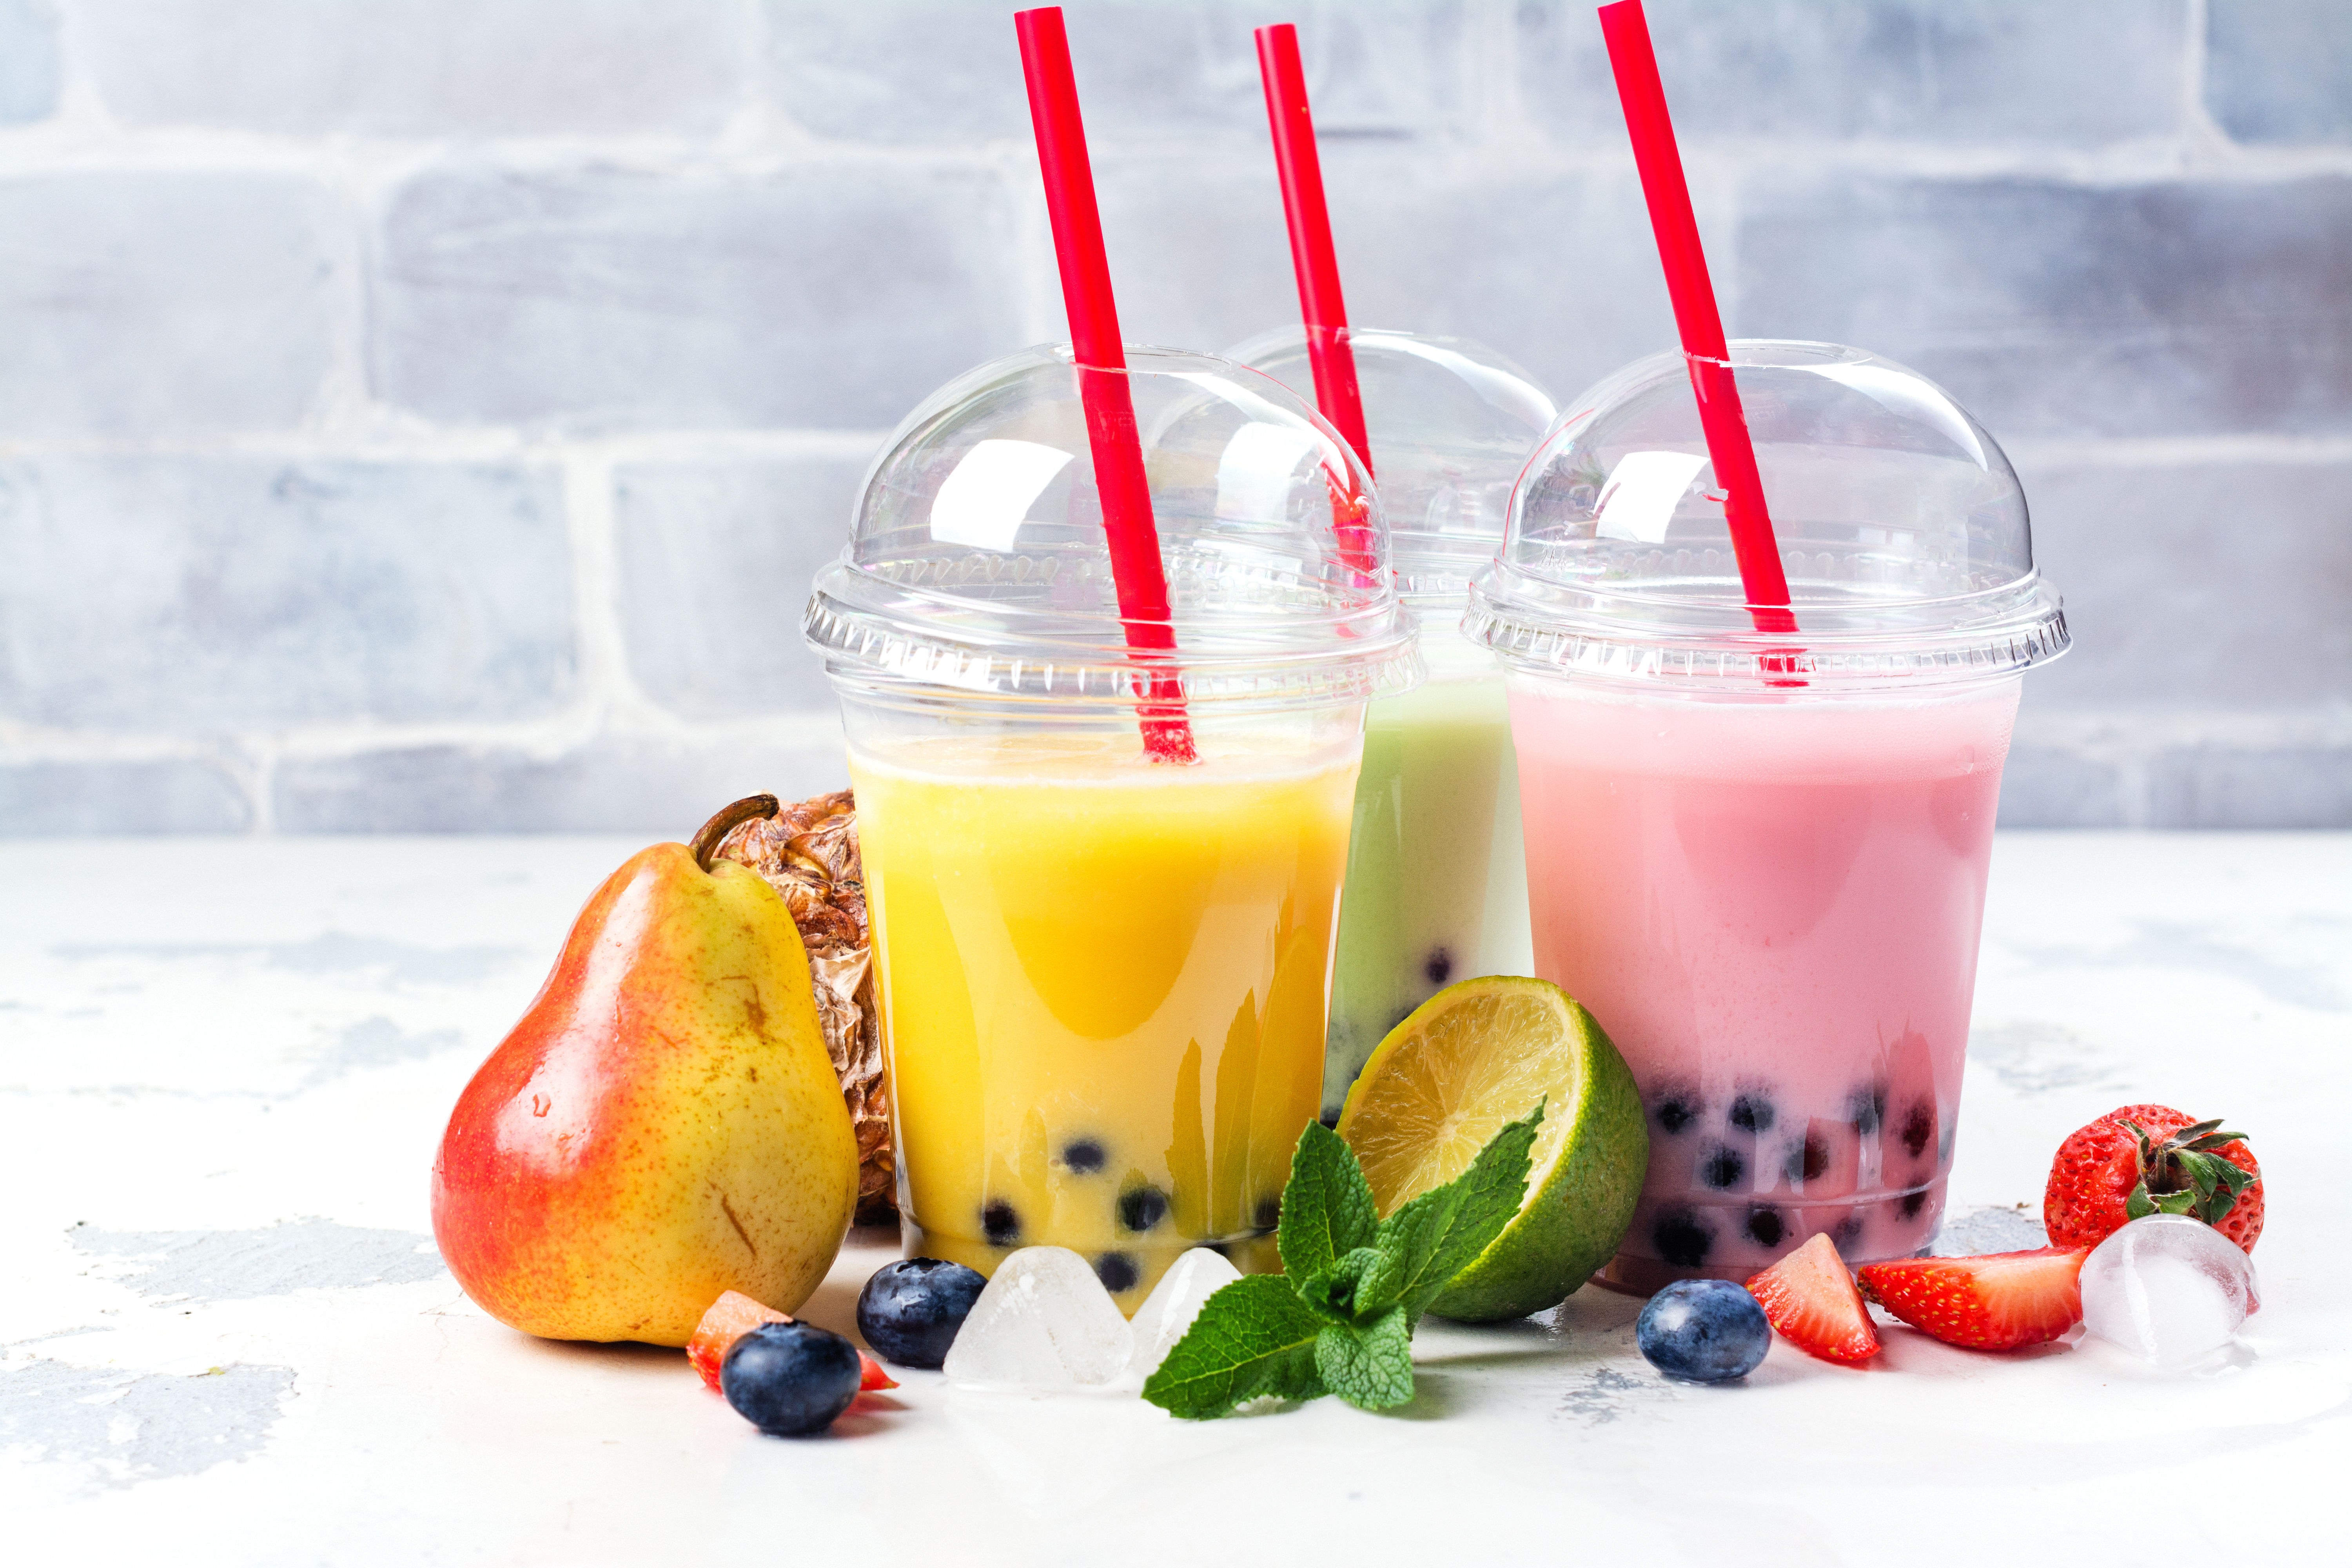 Fan of bubble tea? Here are 9 ingredients to make healthier version ...